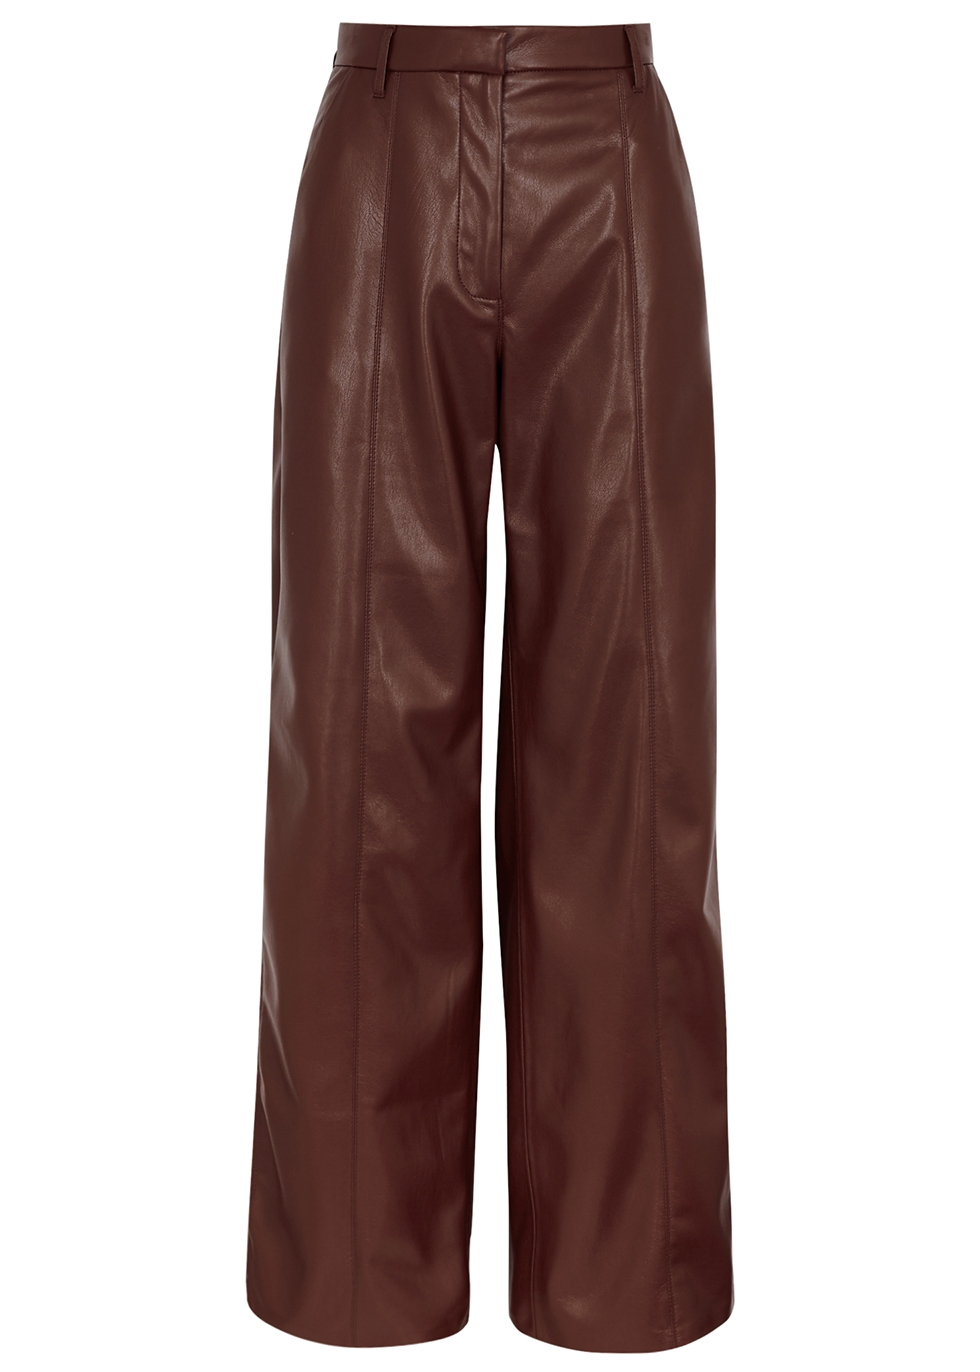 Cleo burgundy wide-leg faux leather trousers